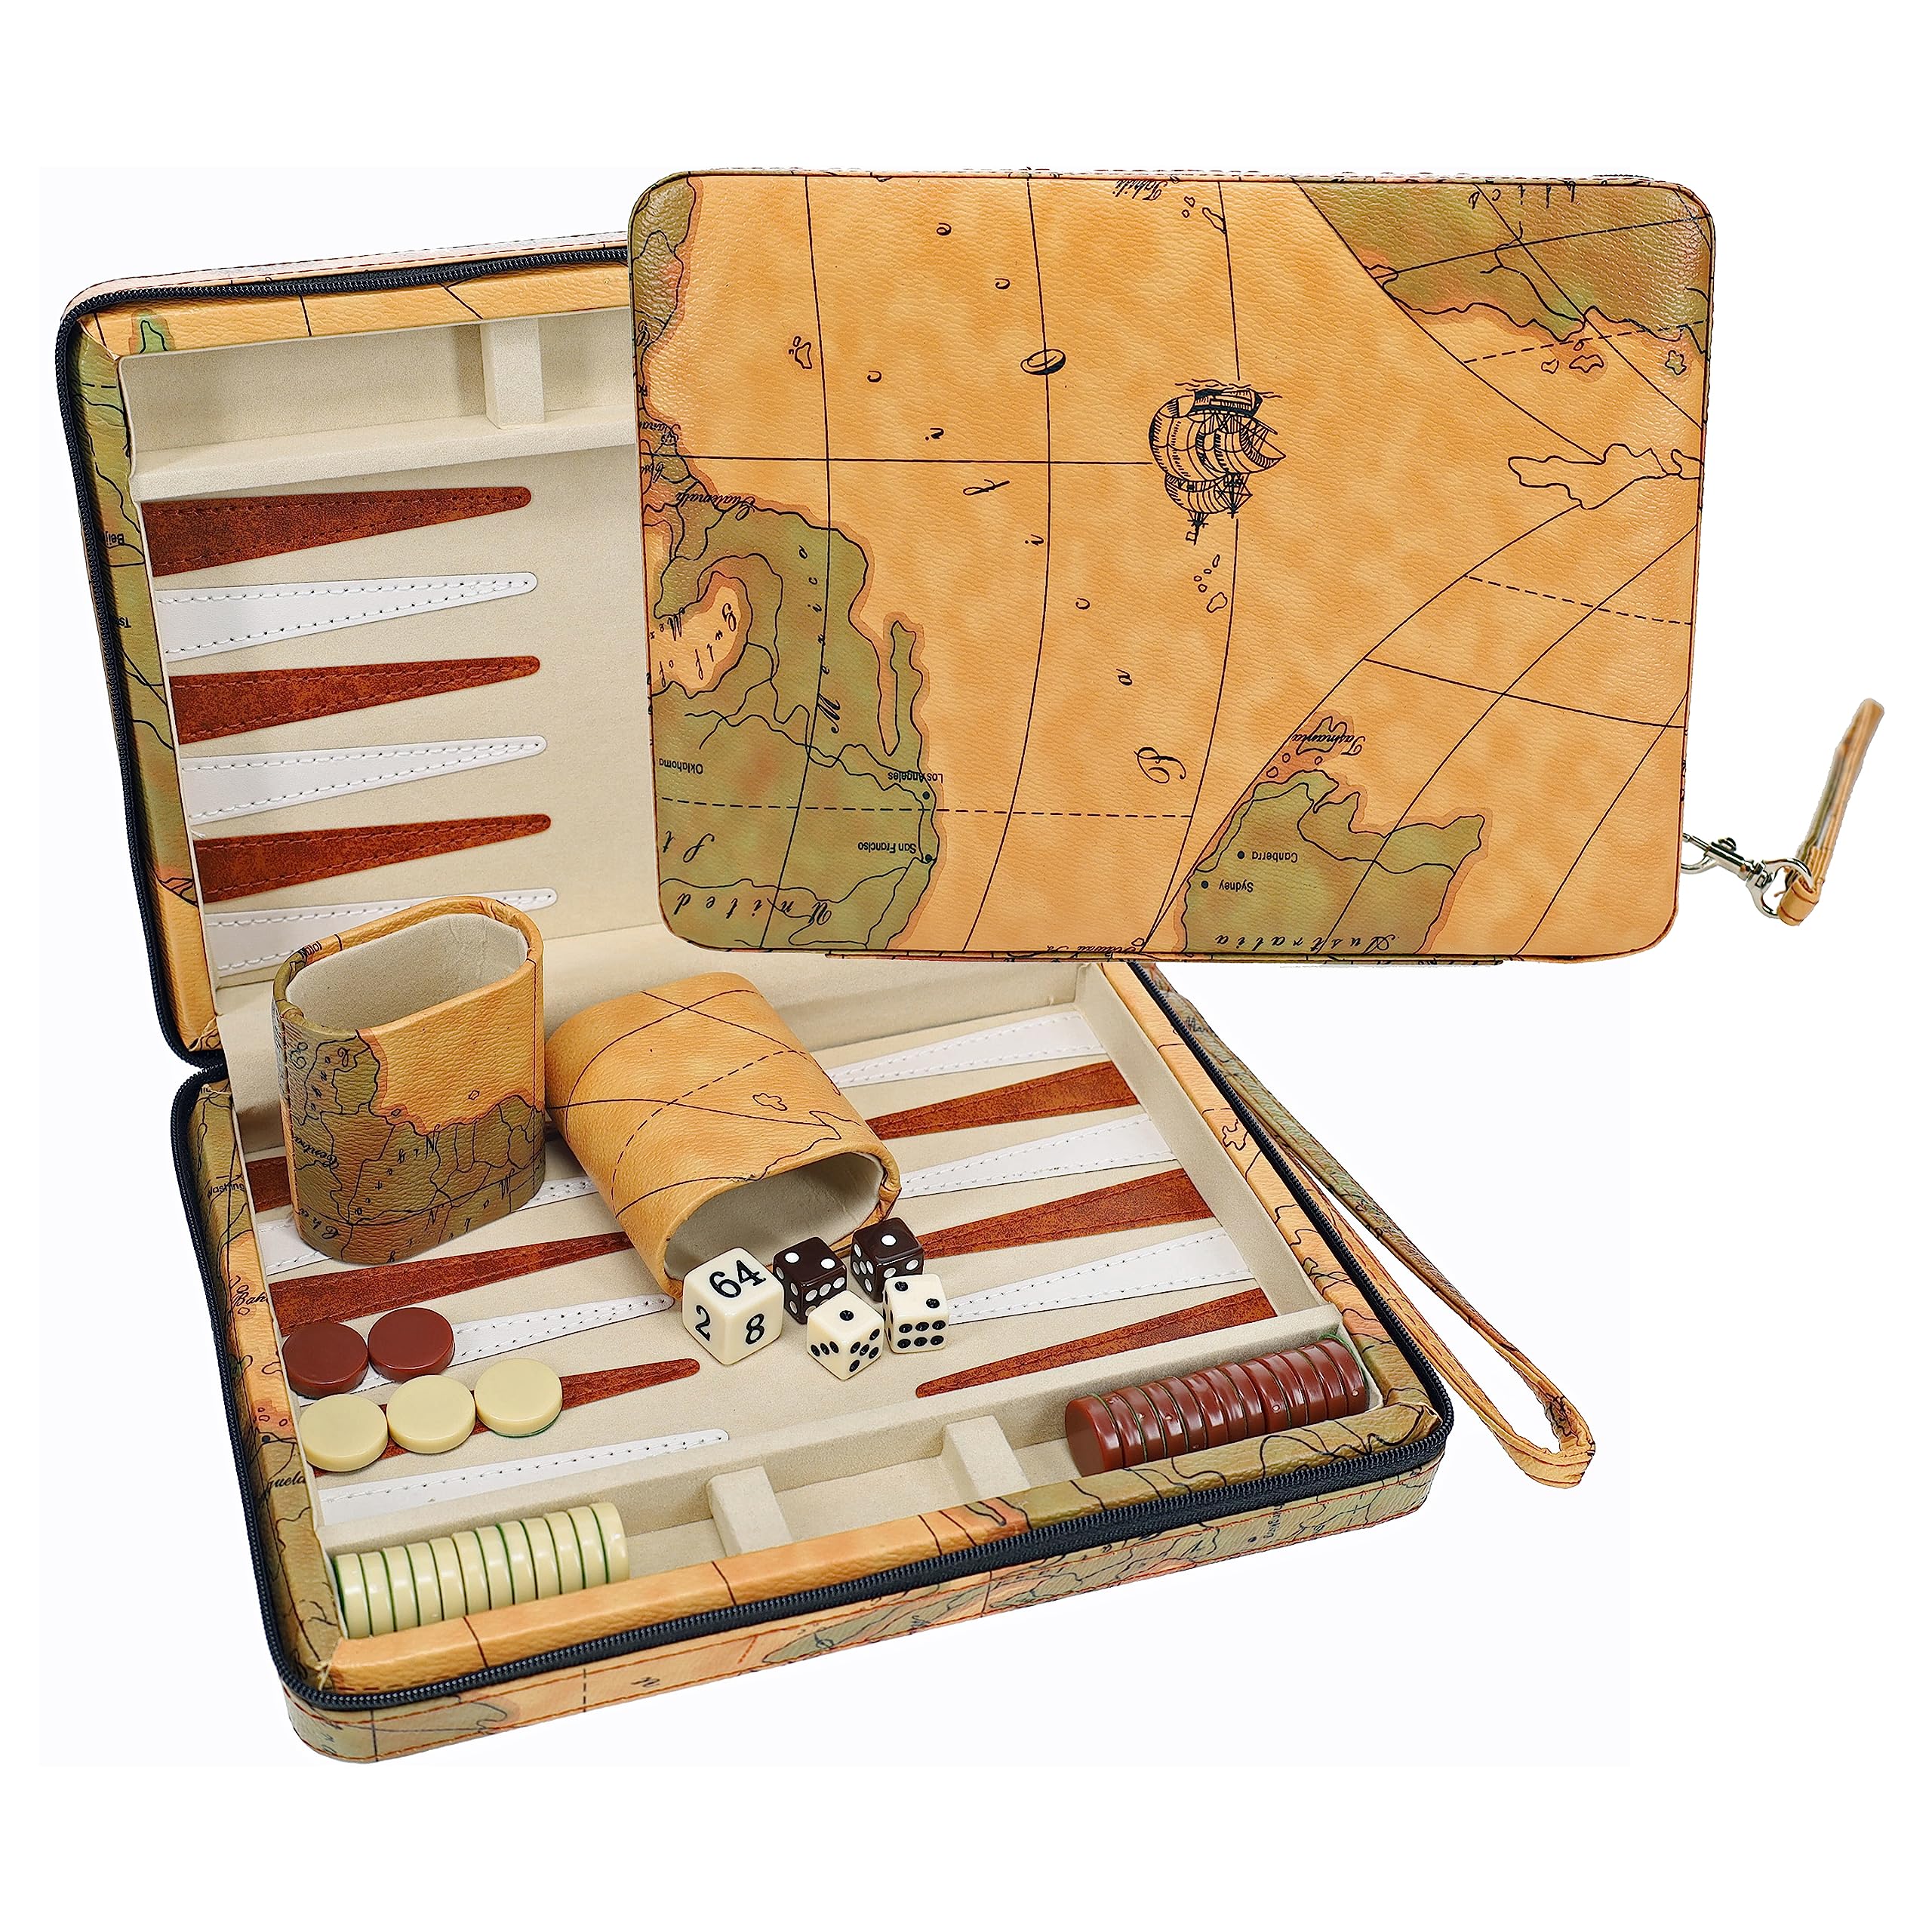 WE Games Backgammon Set, Board Games for Adults - Travel Games - Magnetic with Tan Map Style Leatherette Backgammon Board and Carrying Strap - Travel Backgammon Sets for Adults